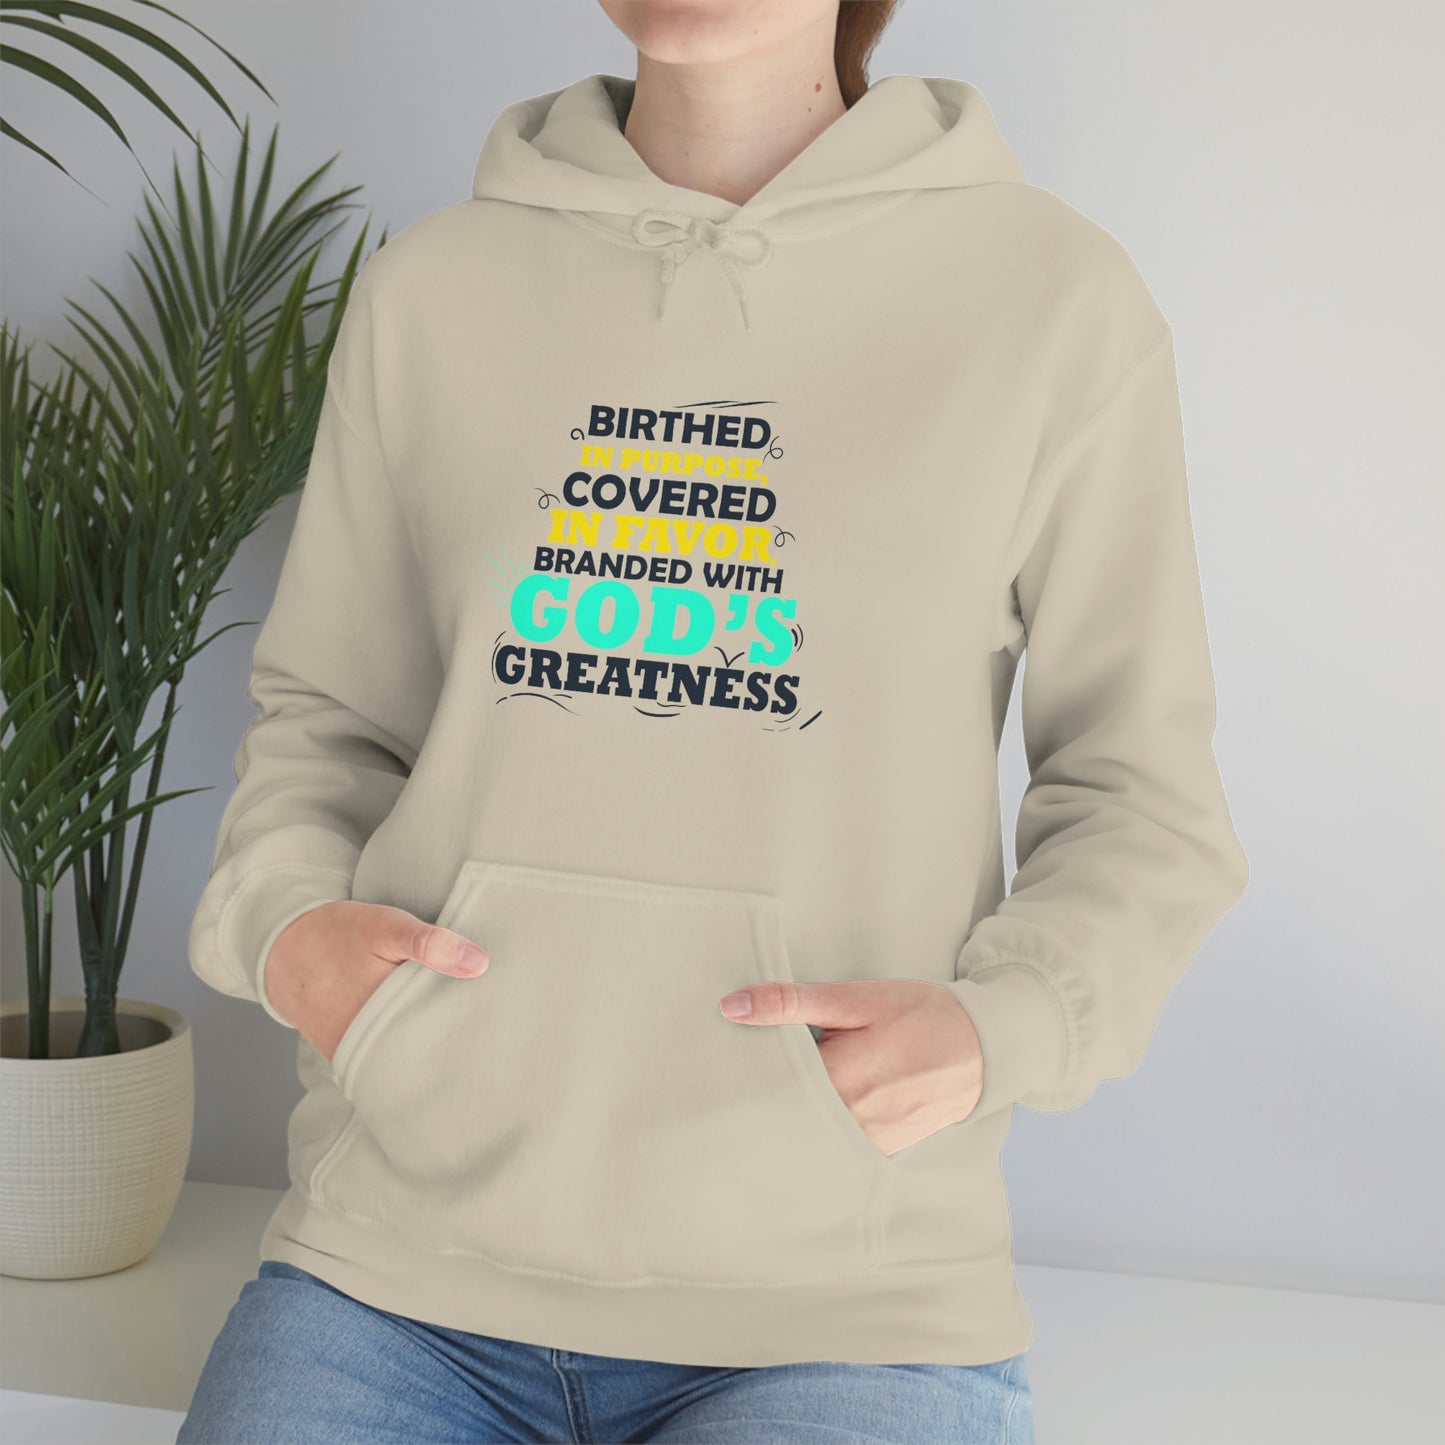 Birthed In Purpose, Covered In Favor, Branded With God's Greatness Unisex Pull On Hooded sweatshirt